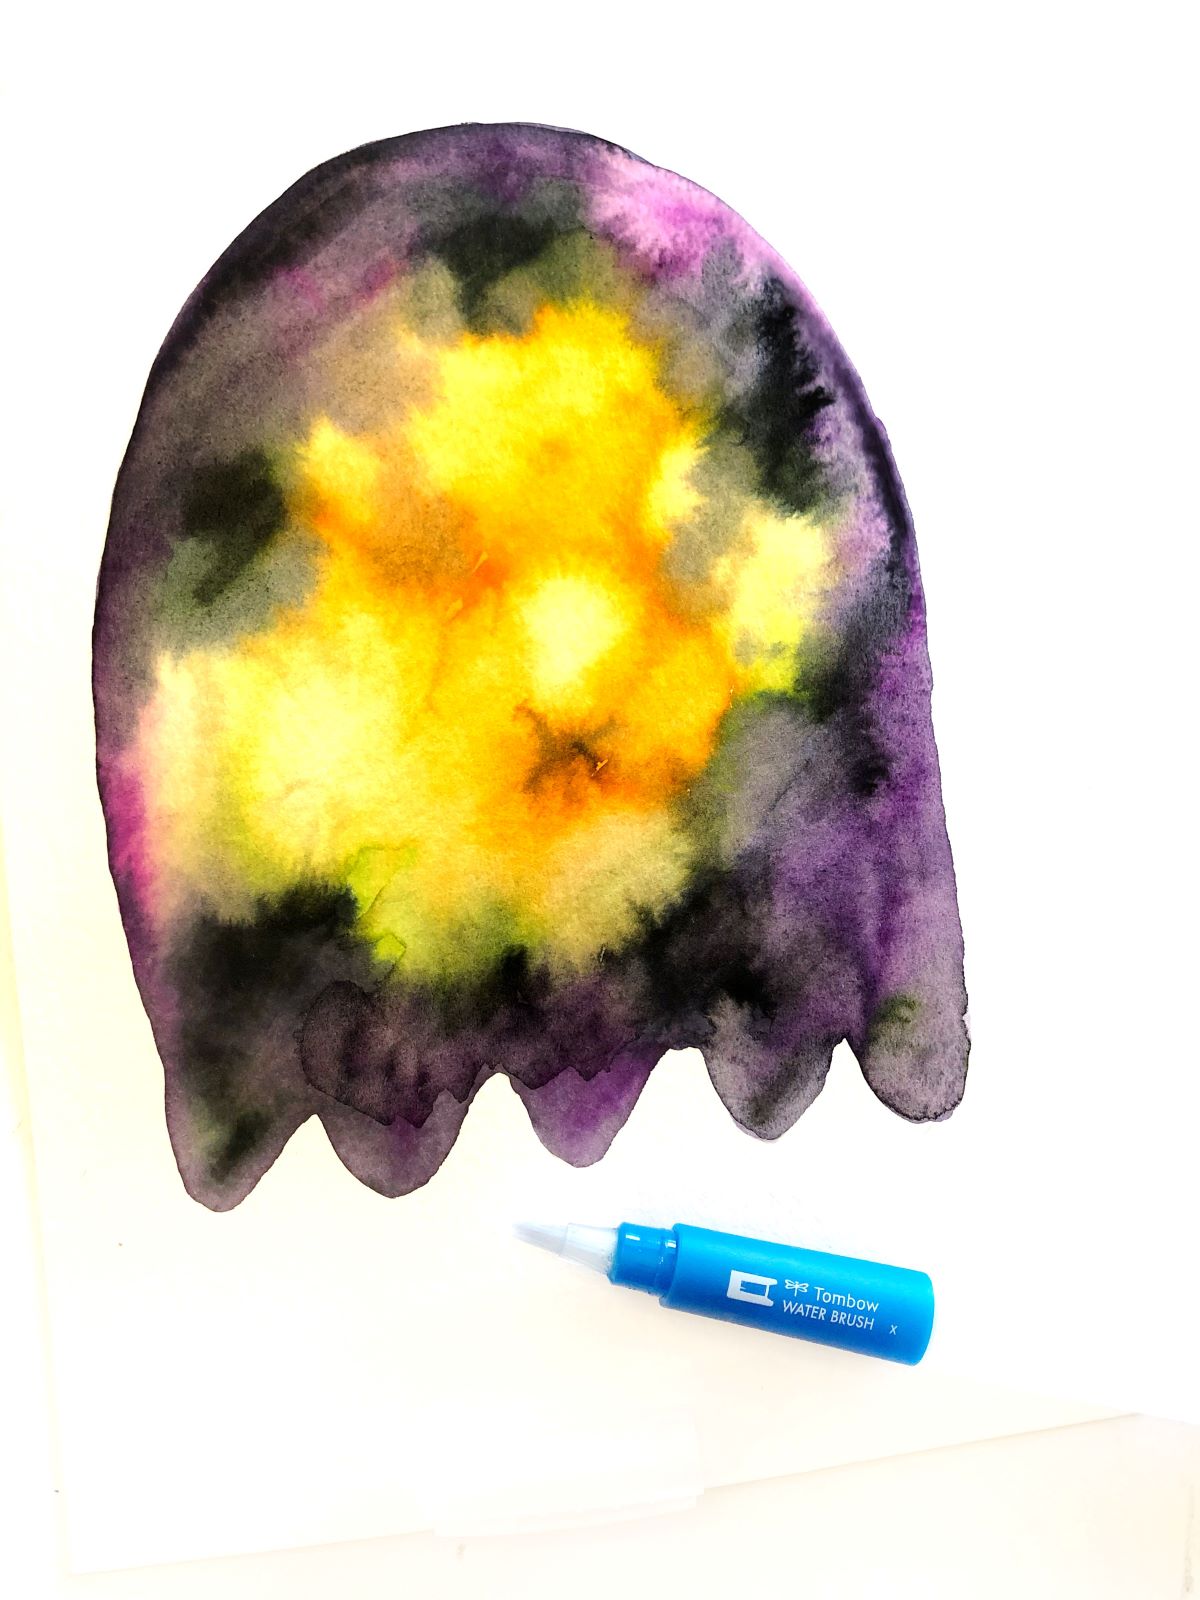 Create A Halloween Galaxy with Tombow Dual Brush Pens and @aheartenedcalling #tombow #galaxy